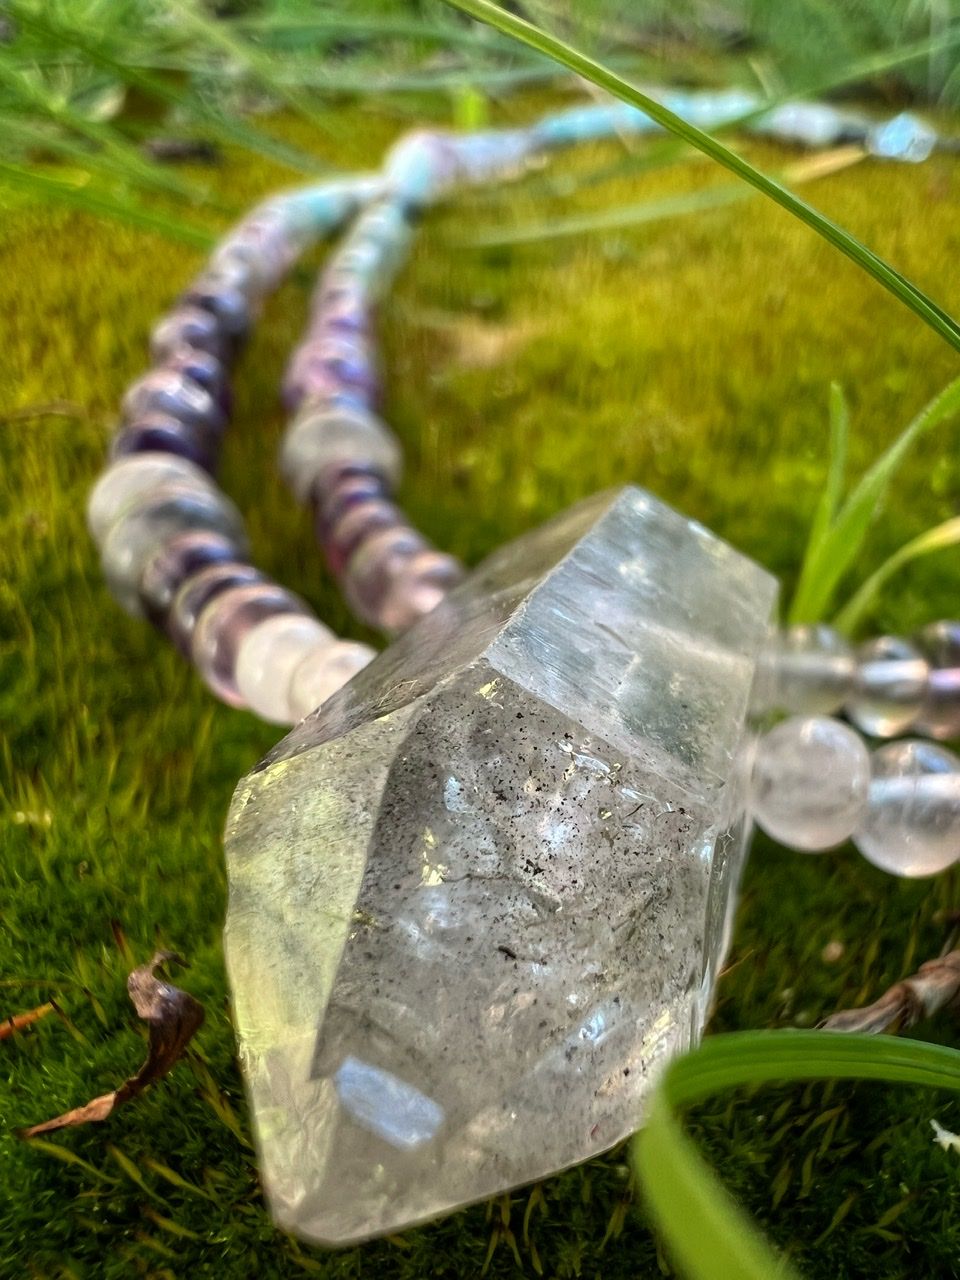 A necklace of clear, pink and grey Quartz, purple amethyst, green fluorite and blue chalcedony rests on lush green moss